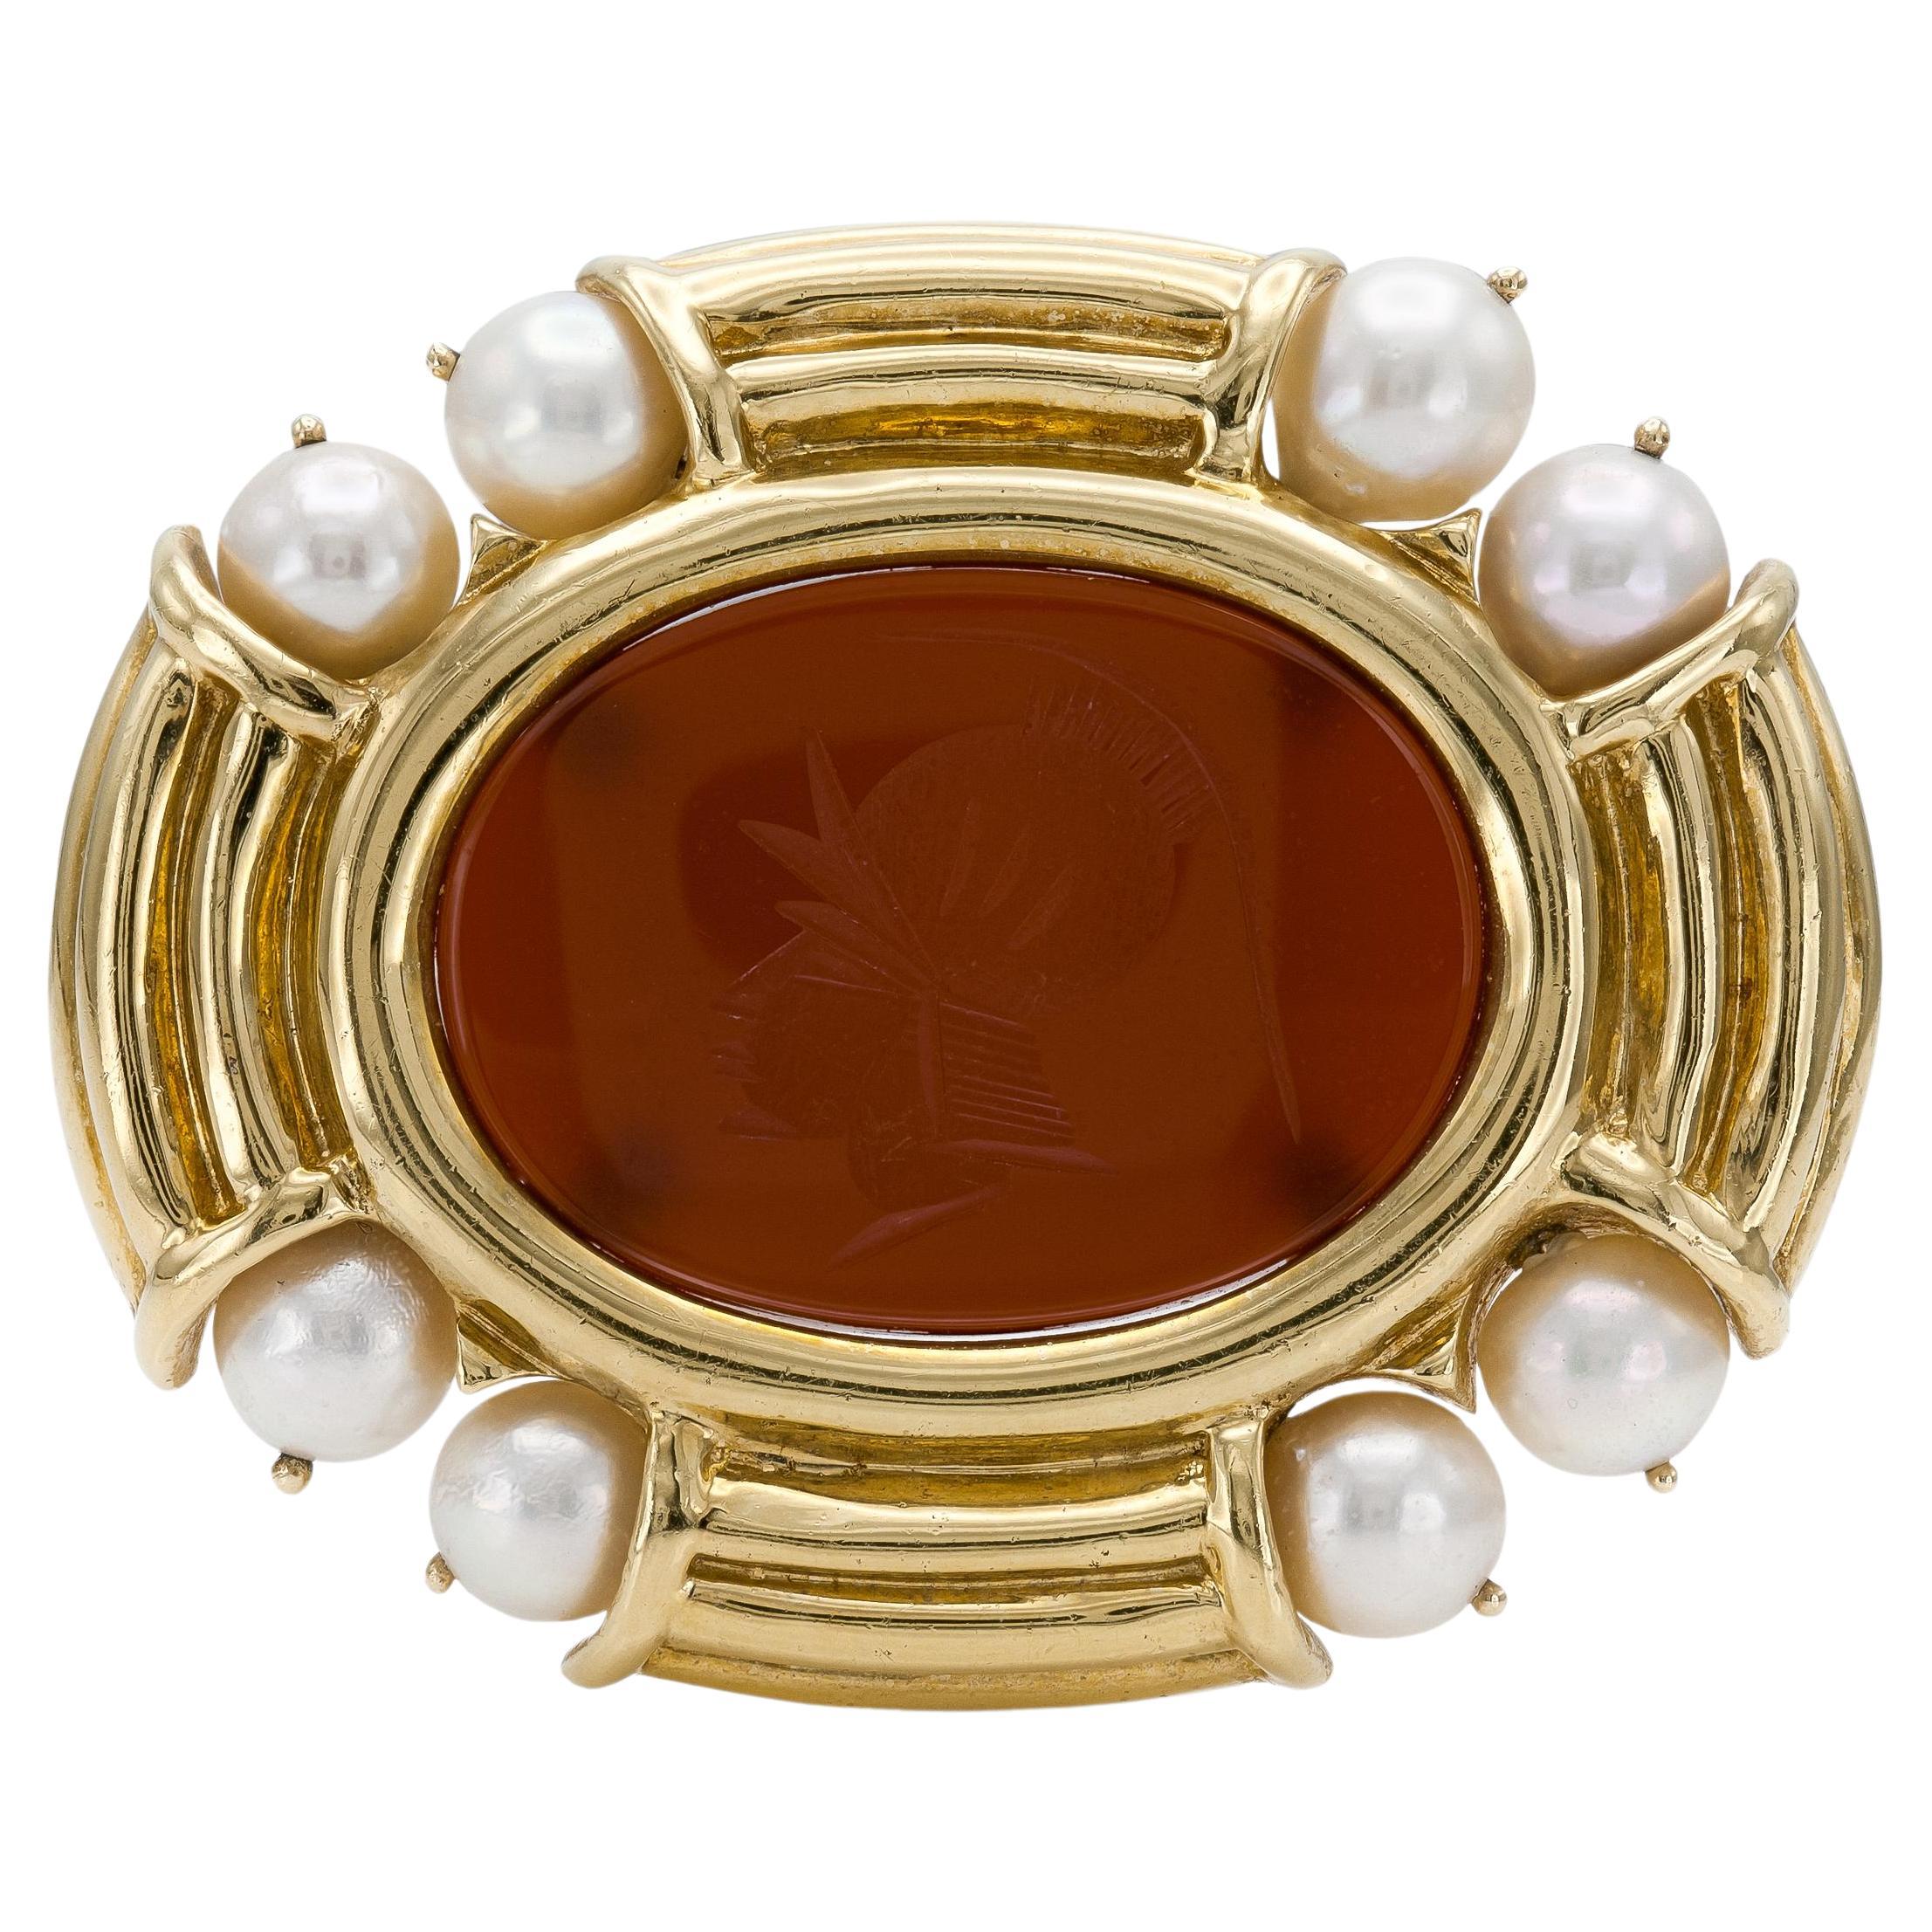 Carnelian Intaglio Yellow Gold Brooch with Pearls